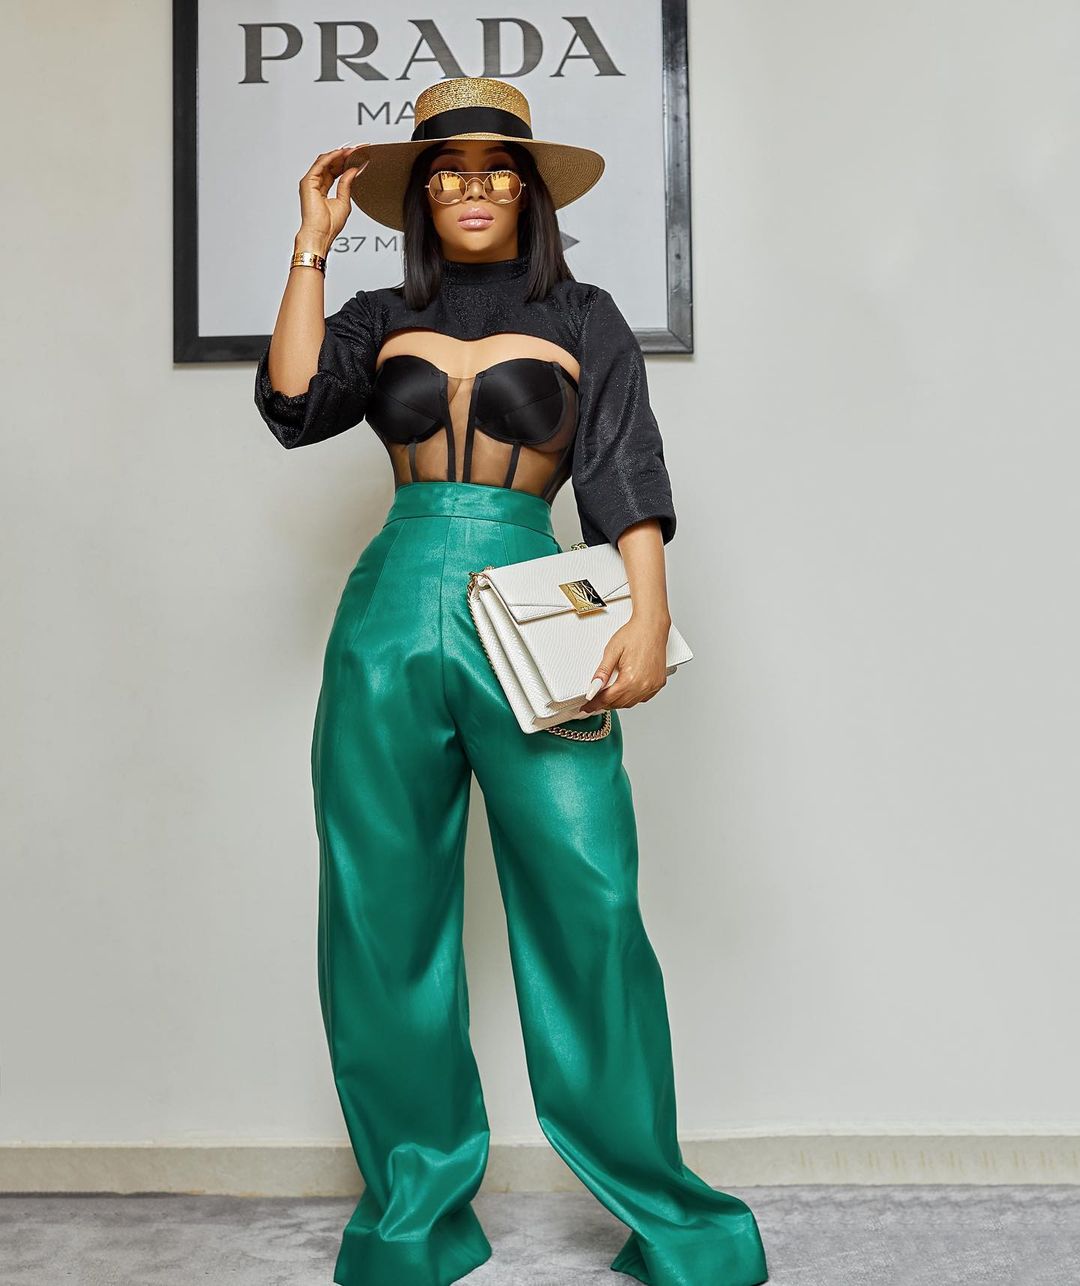  Toke Makinwa Boater Hat Elevates Her Sassy Outfit Even More